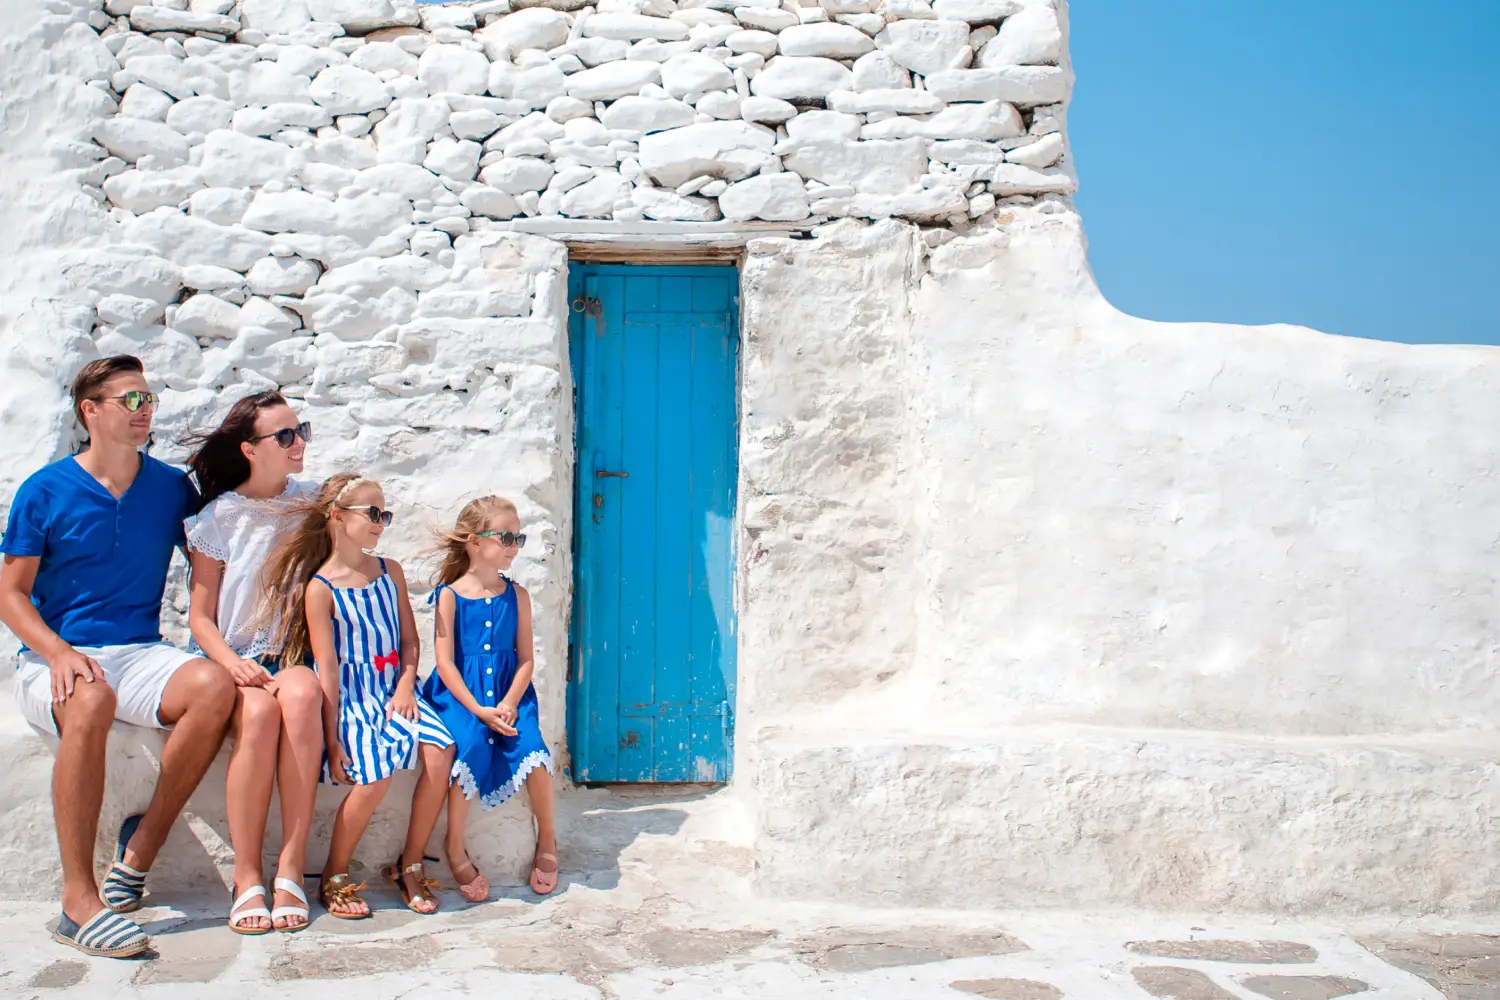 Ferry to Cyclades Islands - Family vacation in Europe. Parents and kids at street of typical greek traditional village with white walls and colorful doors on Mykonos Island, in Greece.